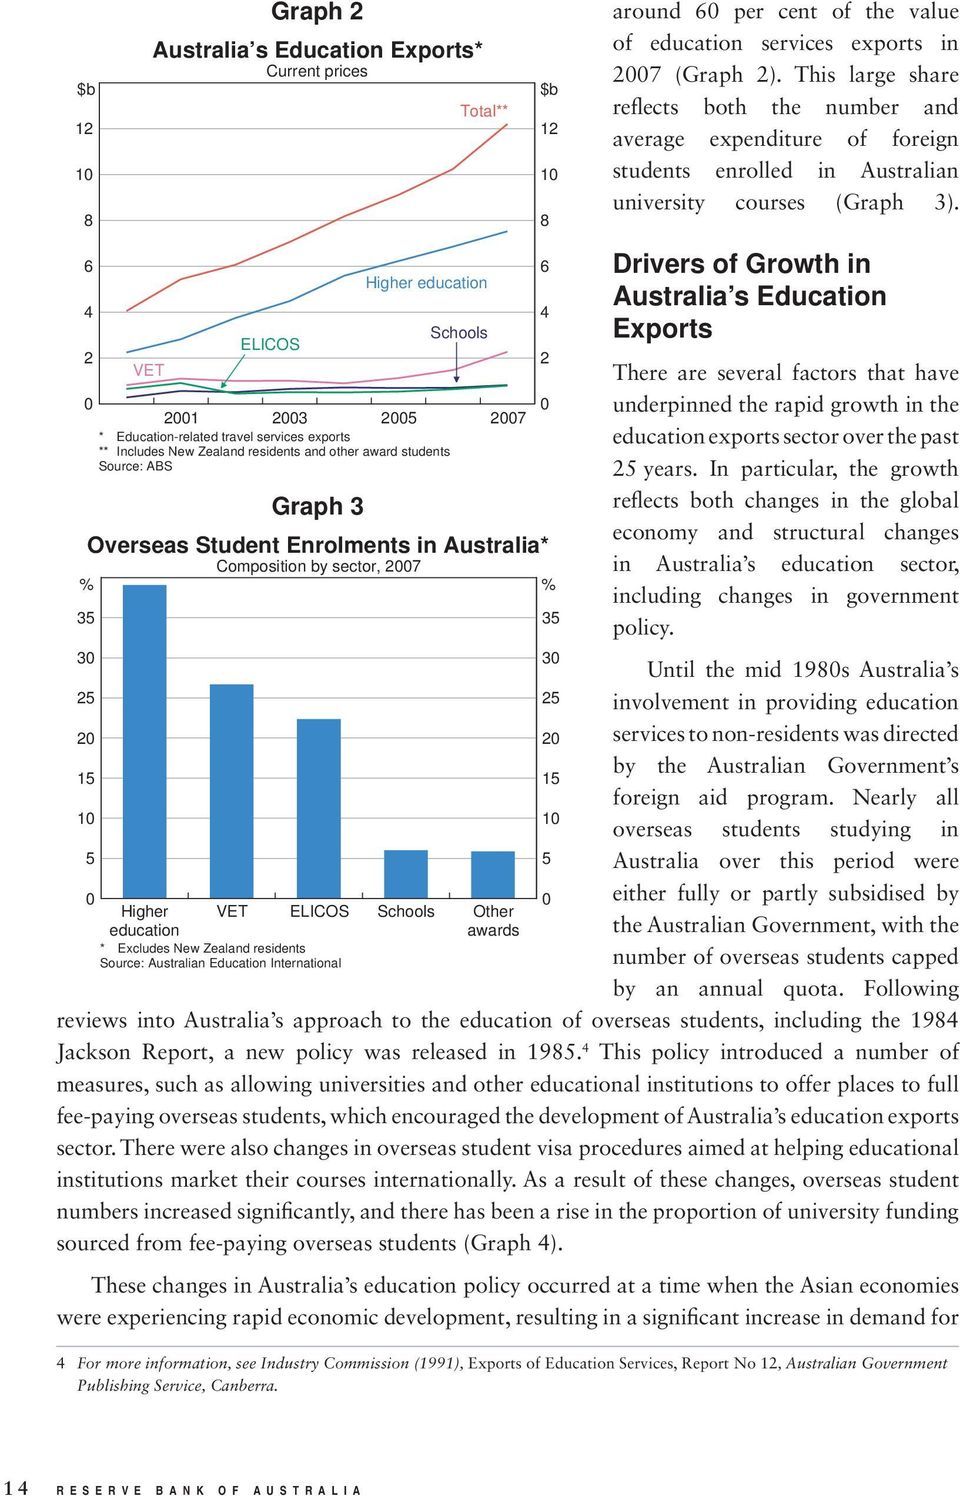 Source: Australian Education International around per cent of the value of education services exports in 27 (Graph 2).